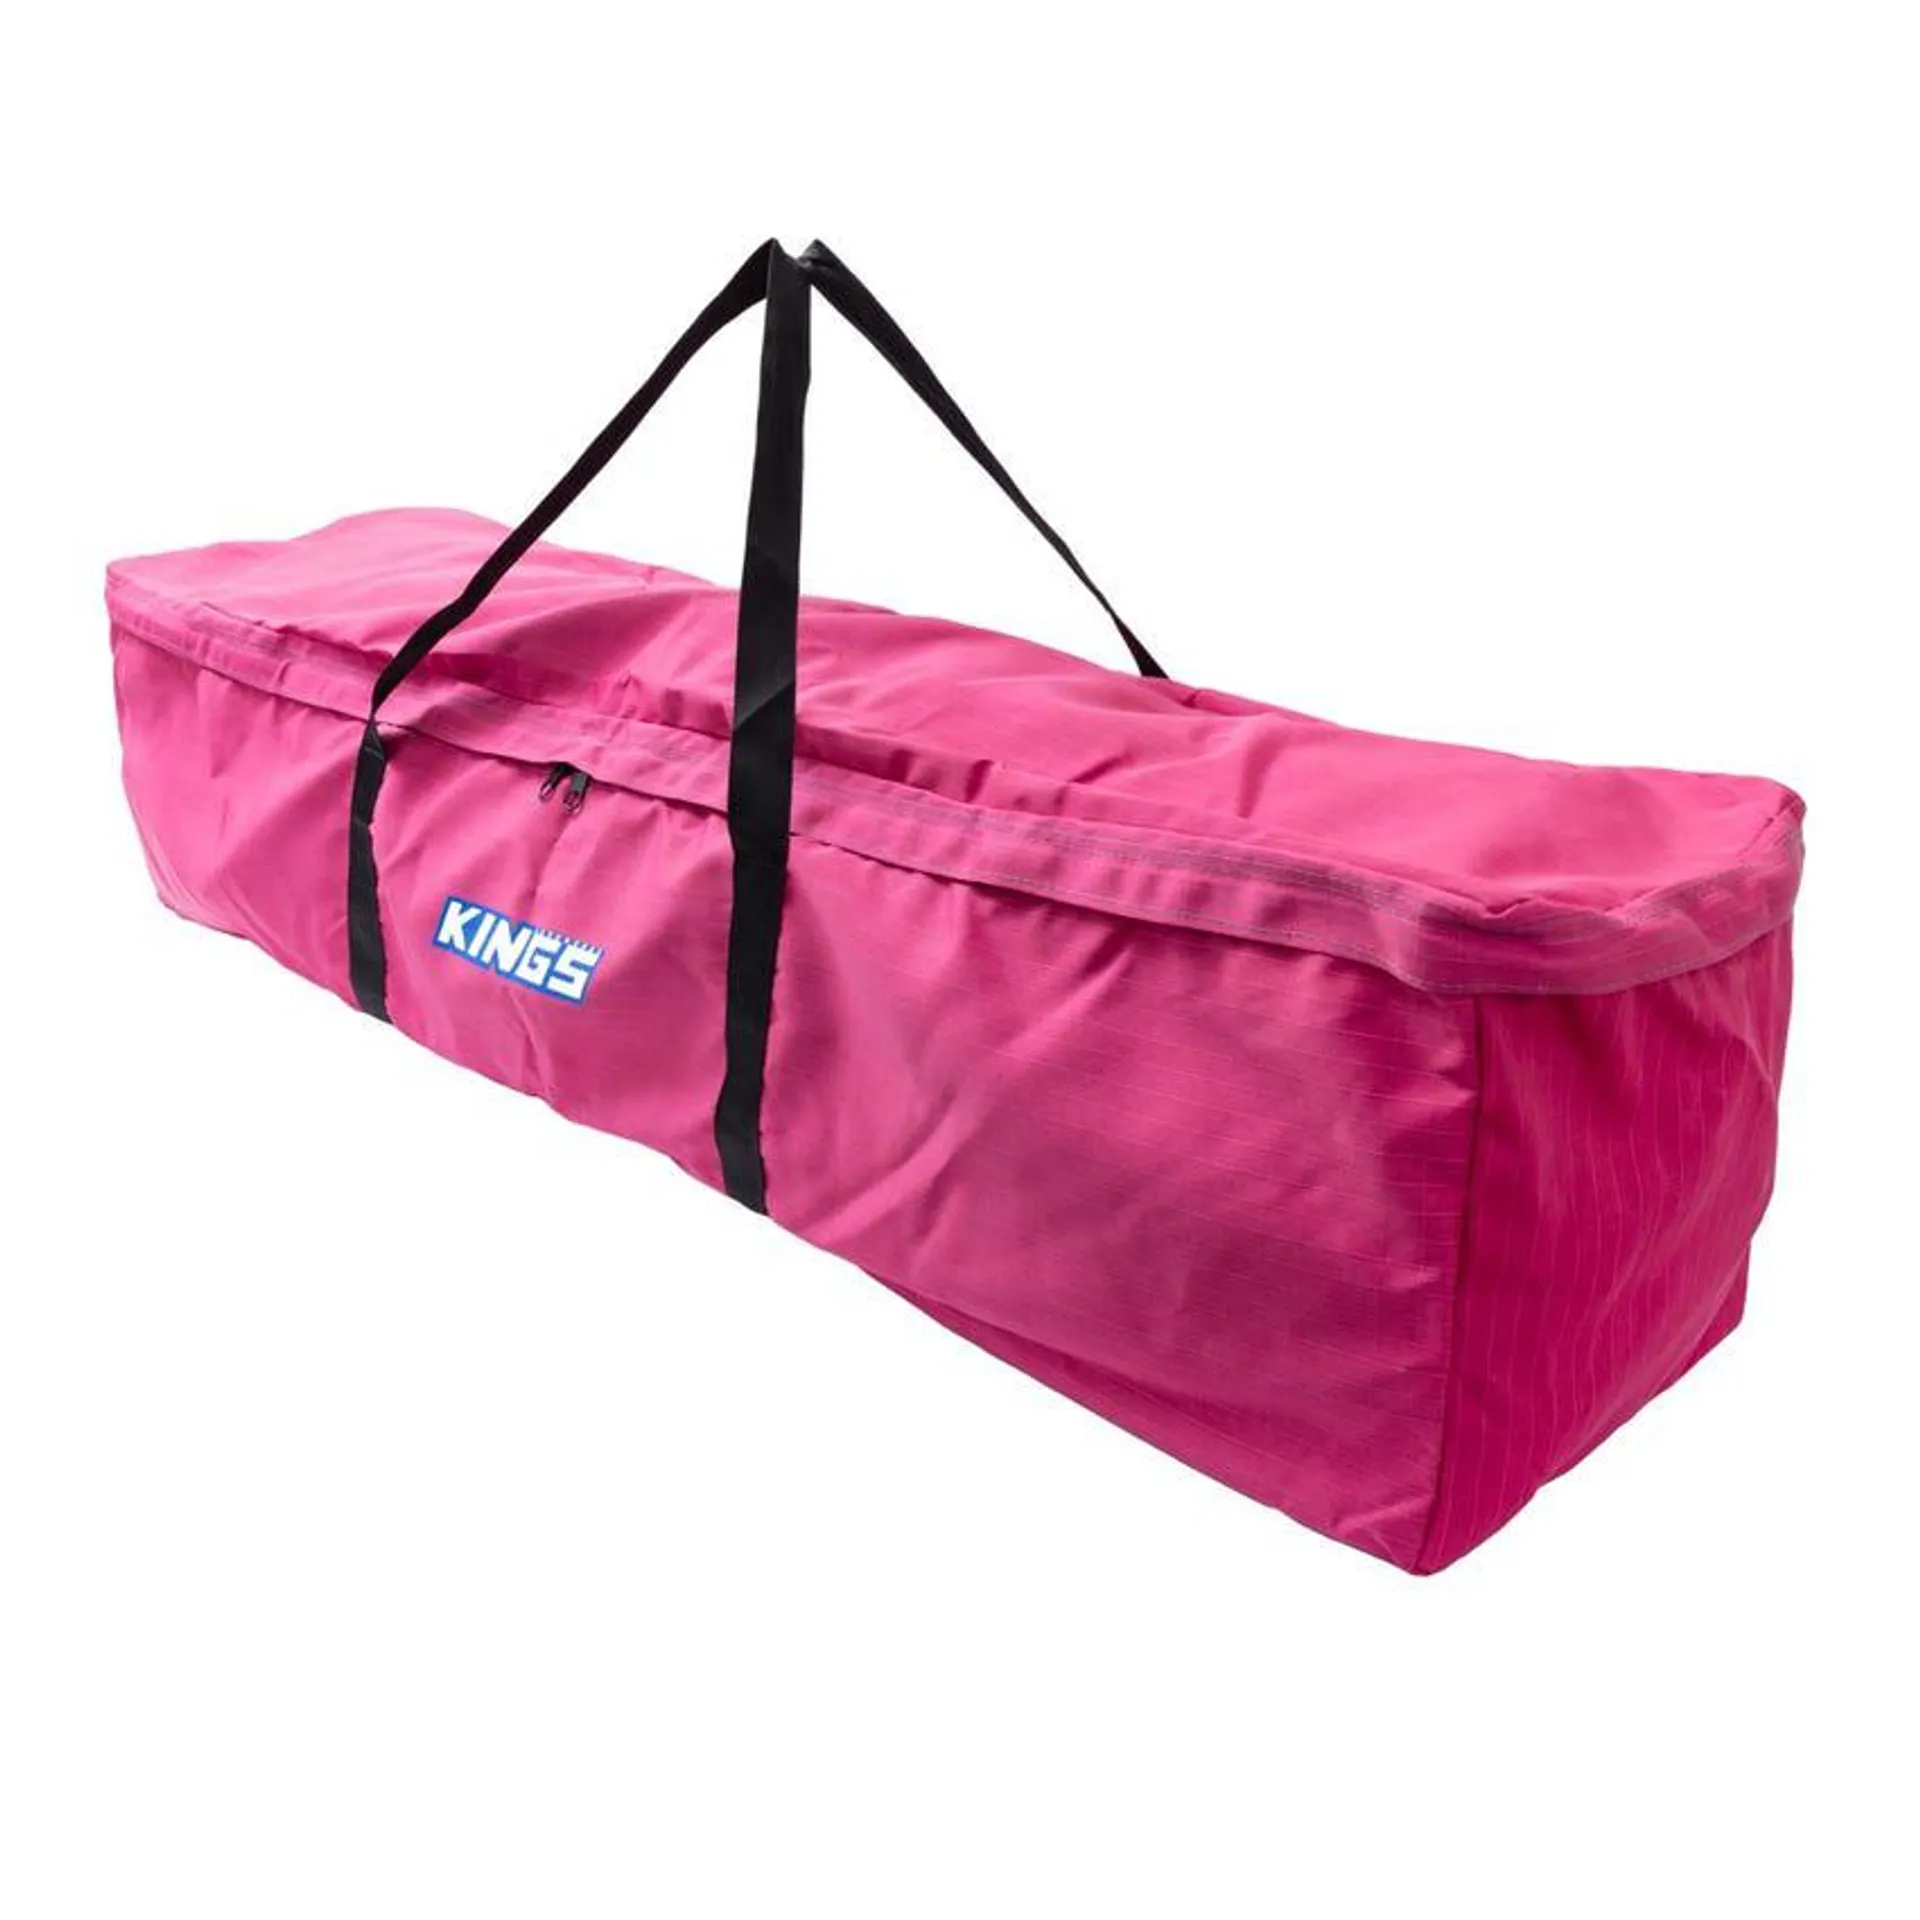 Kings Deluxe Double Swag Pink Canvas Bag | To Suit Kings Pink Double Swag | 380GSM Ripstop Canvas |Ultra-Tough